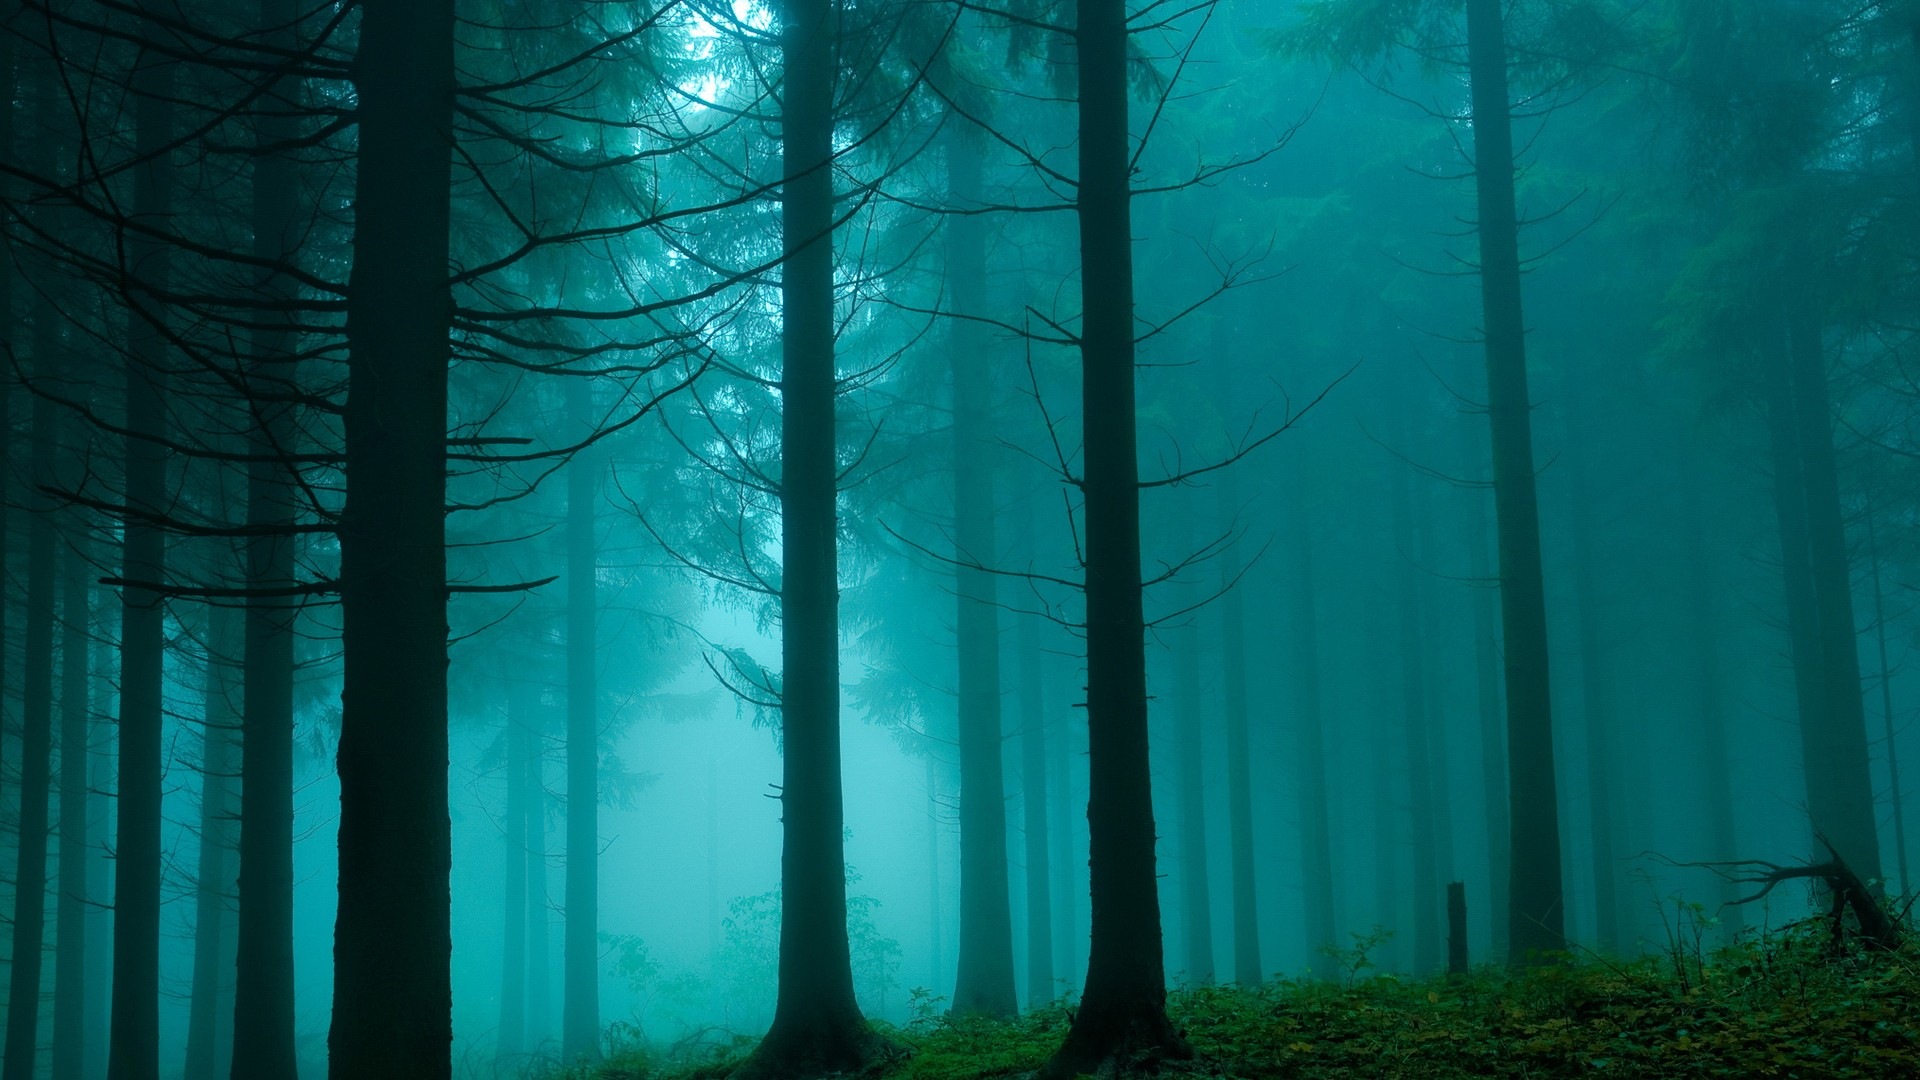 Windows 8 theme forest scenery HD wallpapers #8 - 1920x1080